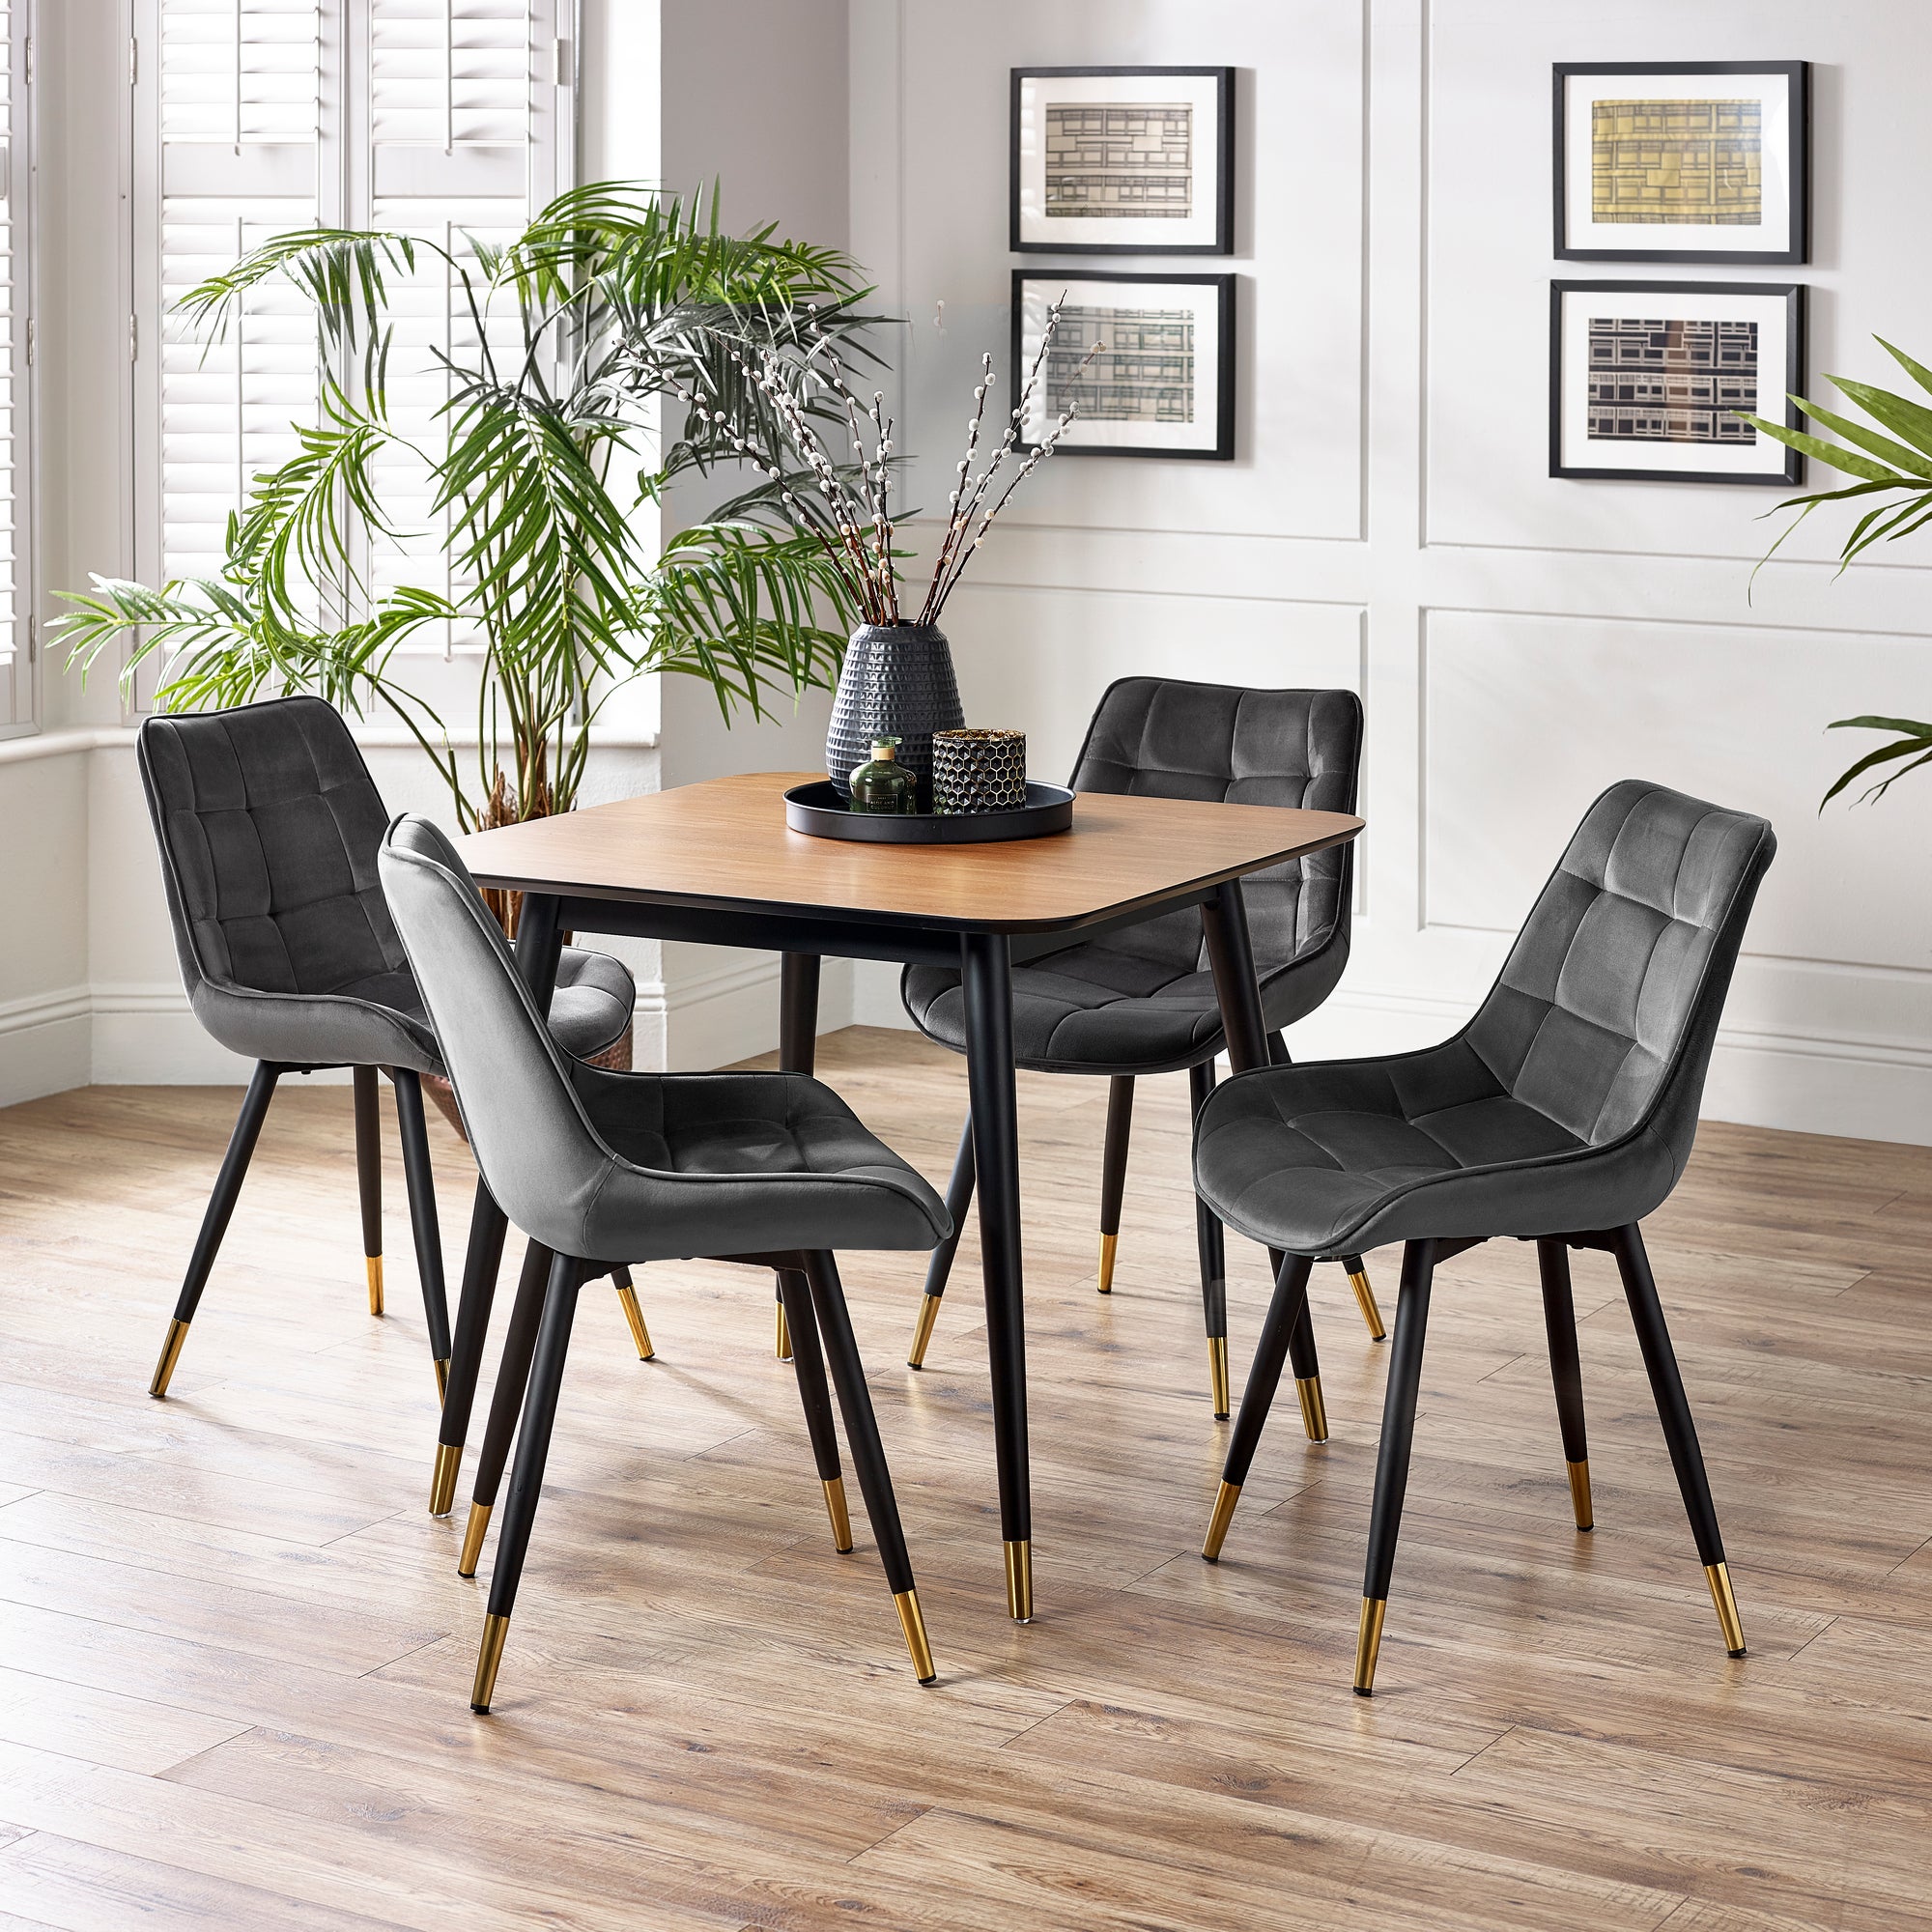 Findlay 4 Seater Square Dining Table Beech Wood Brown